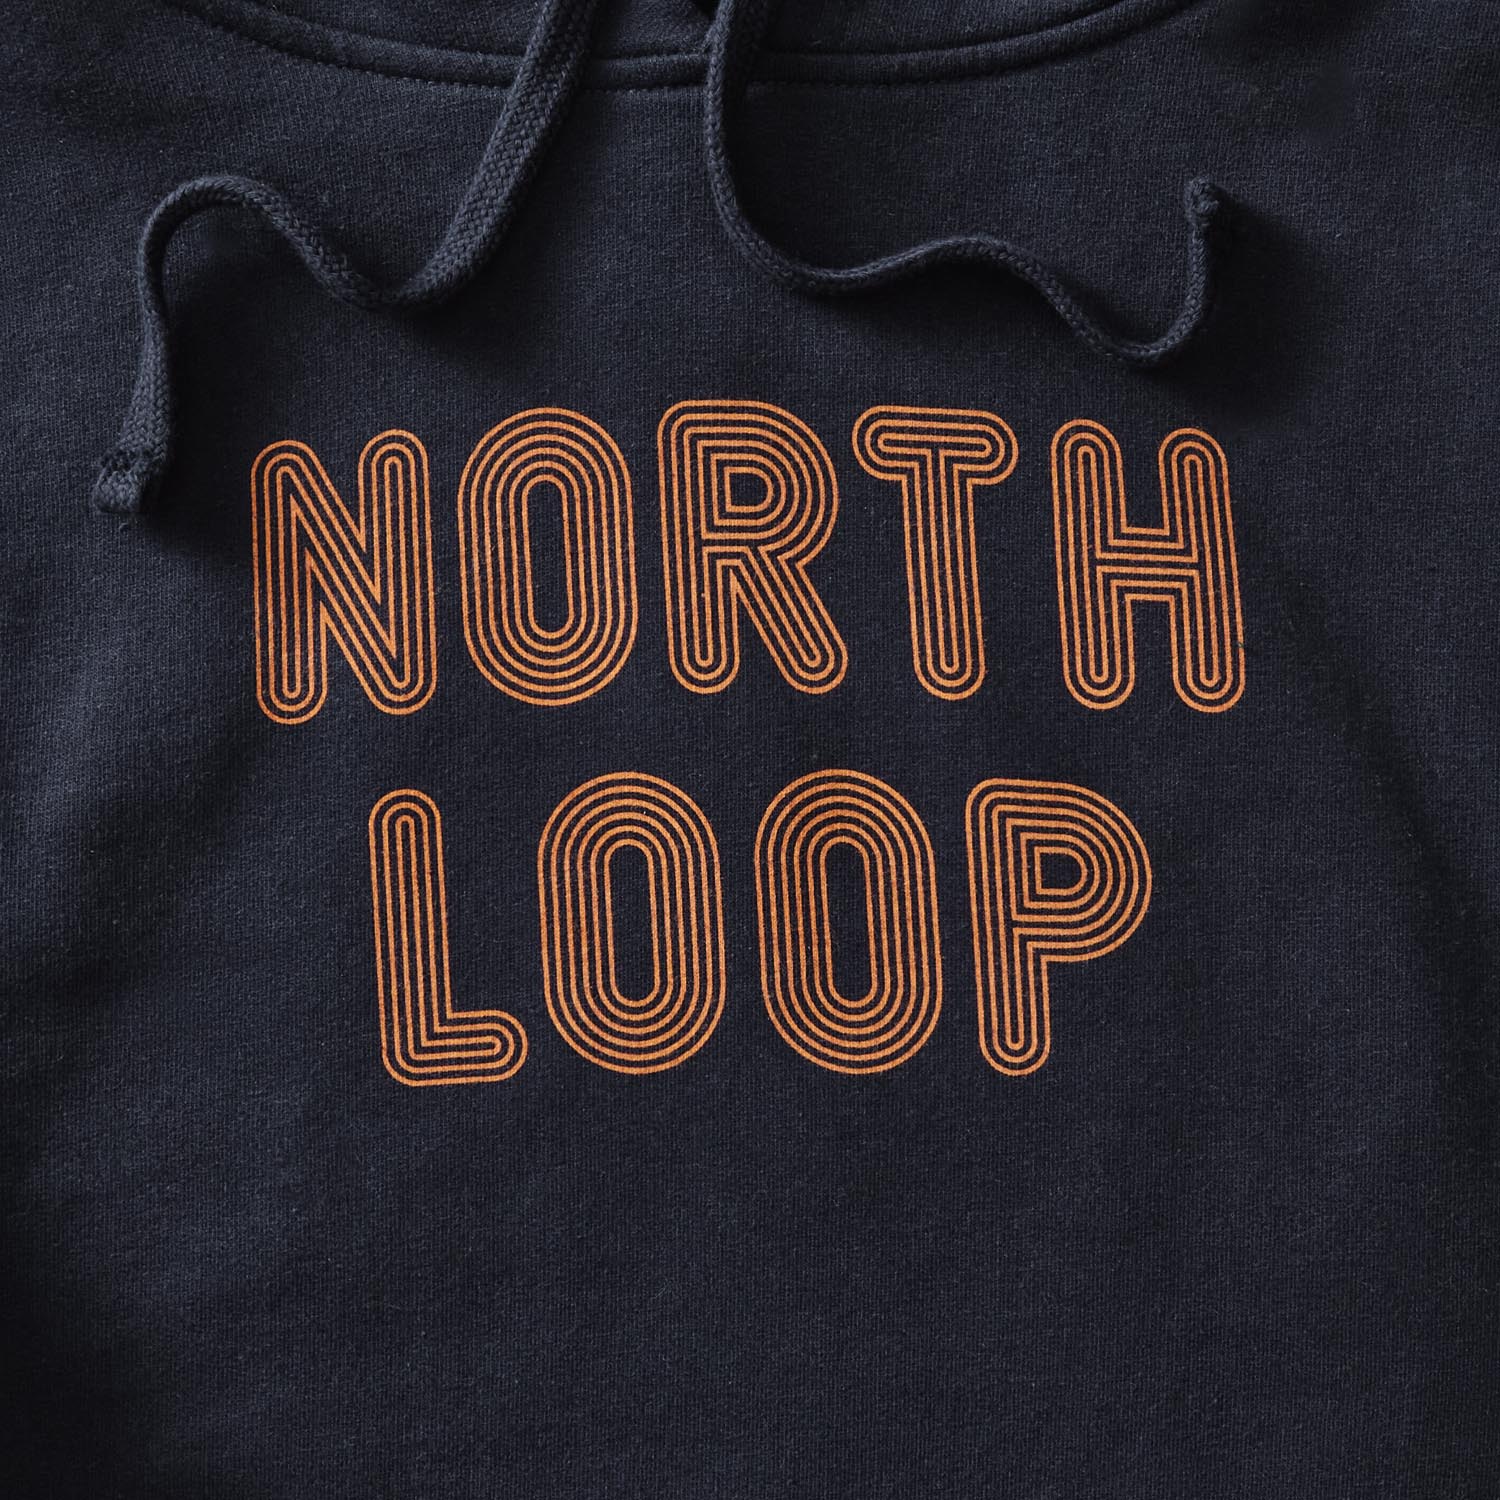 Details of classic navy pullover hoodie with North Loop text in orange with a multi-stroke effect. minnesota clothing, minnesota apparel, minnesota accessories, minnesota gifts, minnesota goods, minnesota-themed clothing, minnesota-themed apparel, minnesota-themed gifts, minnesota-themed goods, twin cities clothing, twin cities apparel, twin cities accessories, minneapolis clothing, minneapolis apparel, twin cities neighborhoods, minneapolis neighborhoods